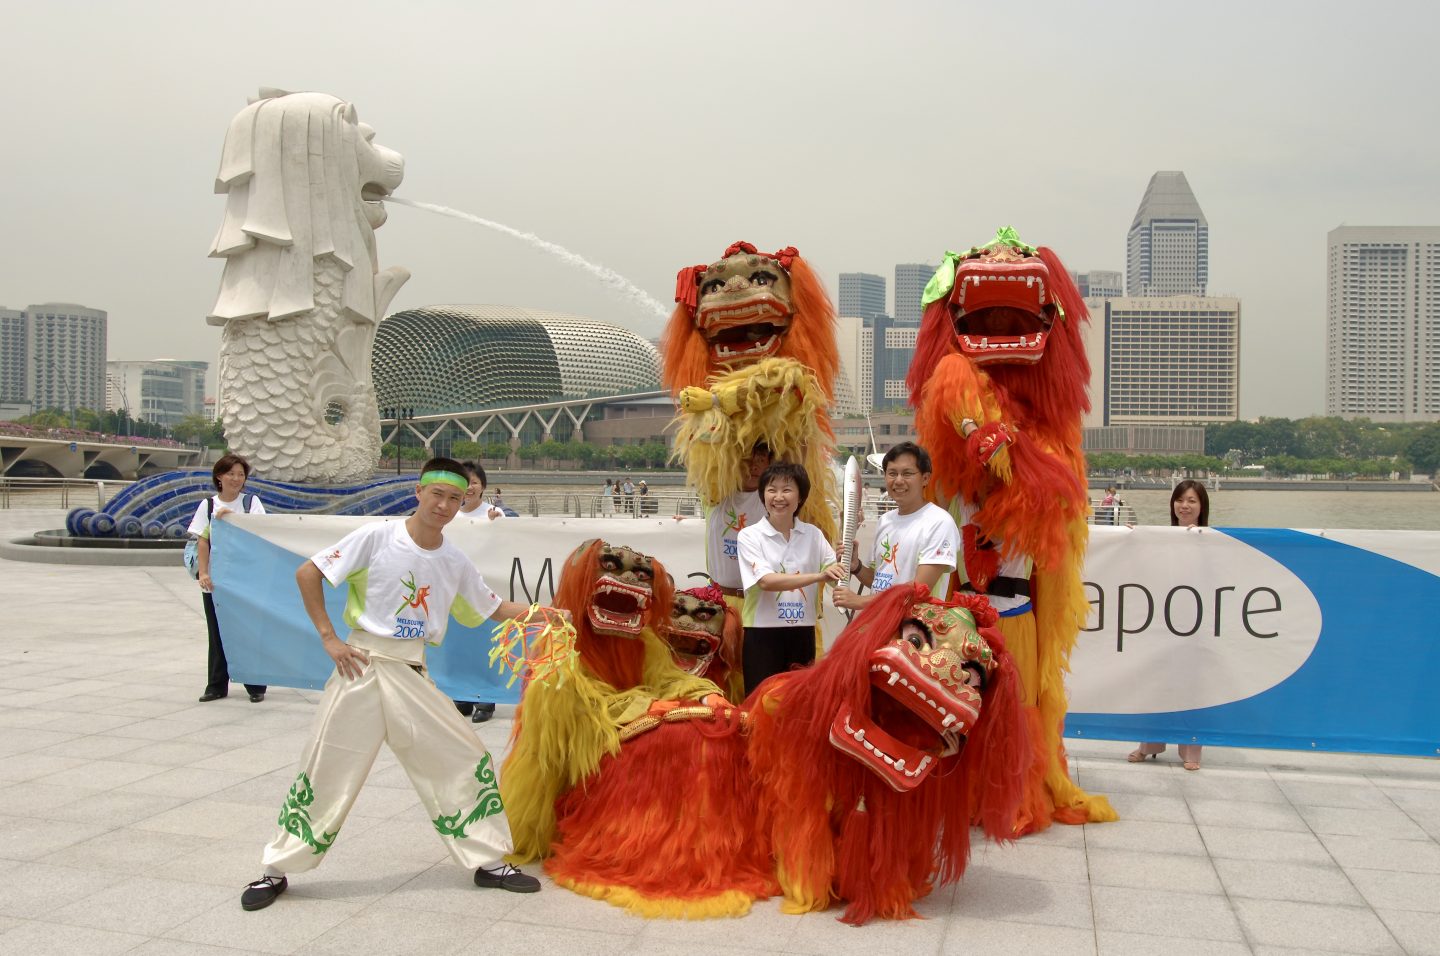 Receiving the torch at Marina Bay in October 2006 for the Melbourne 2006 Commonwealth Games when it passed through Singapore. The torch travelled from Buckingham Palace in London on an epic 180,000 km to the opening ceremony of the Games.